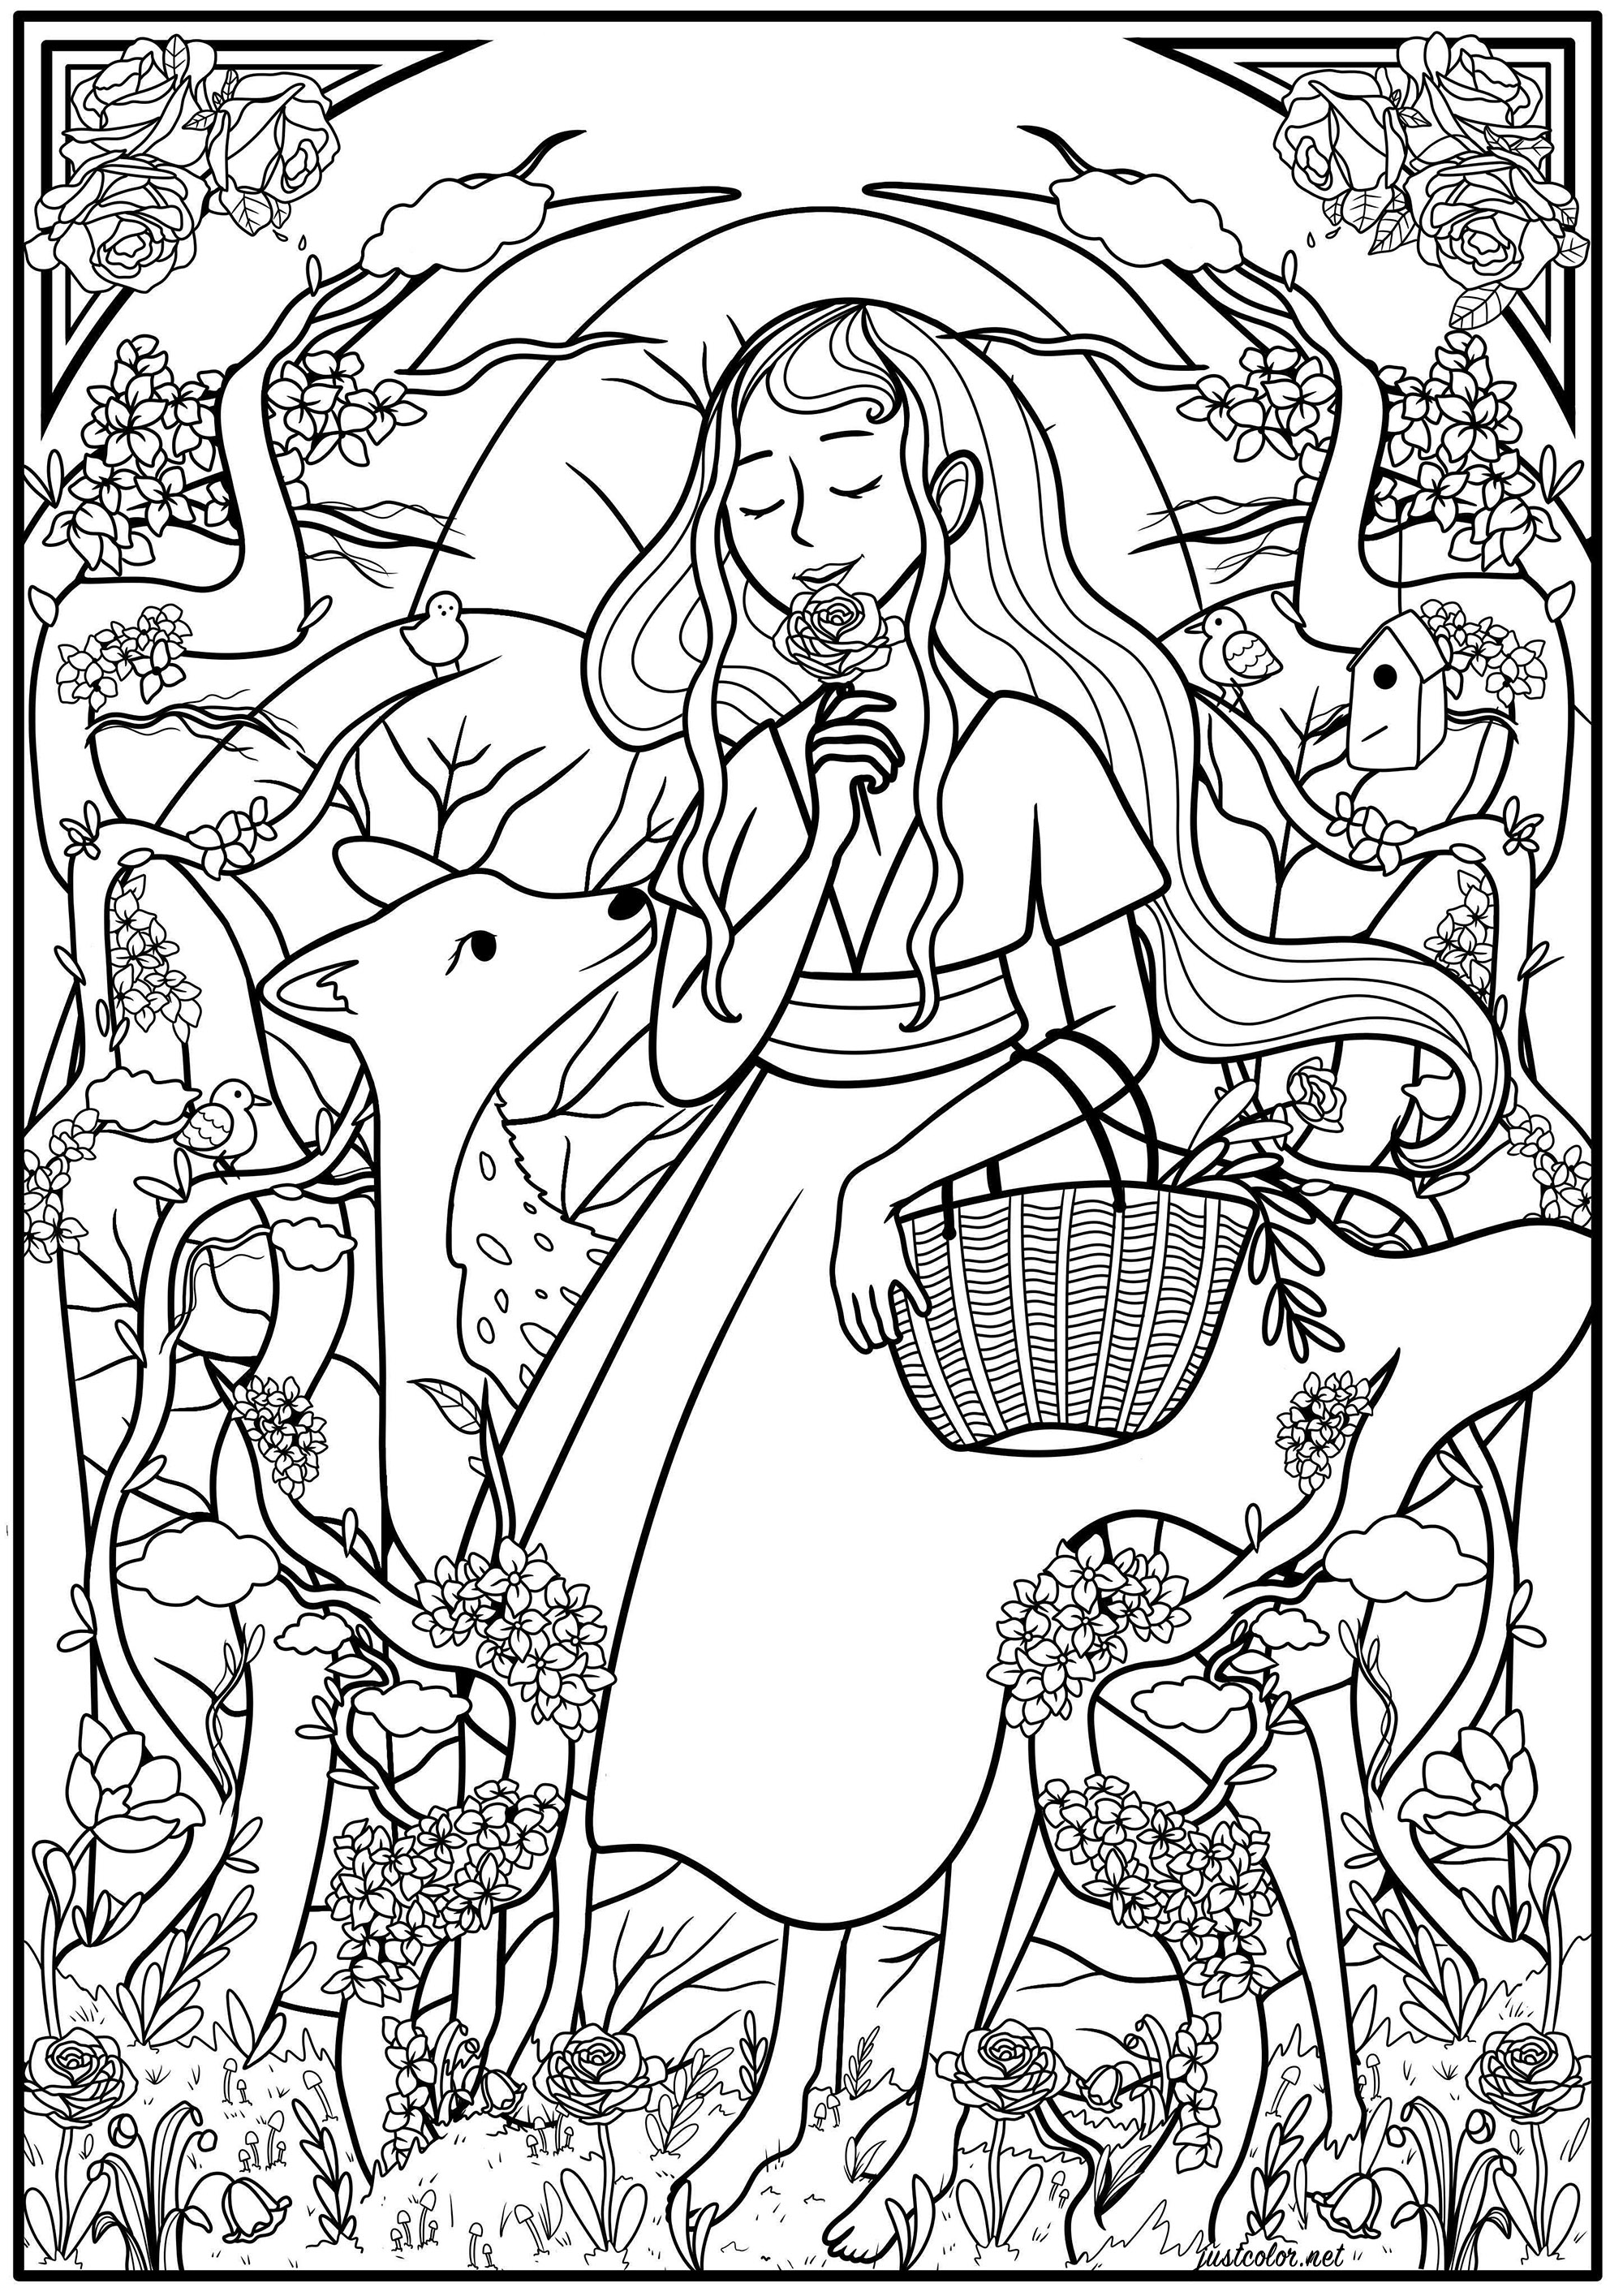 Young woman picking flowers in the forest, surrounded by lots of vegetation and a fawn accompanying her. This coloring page is inspired by the Art Nouveau style, Artist : Océane